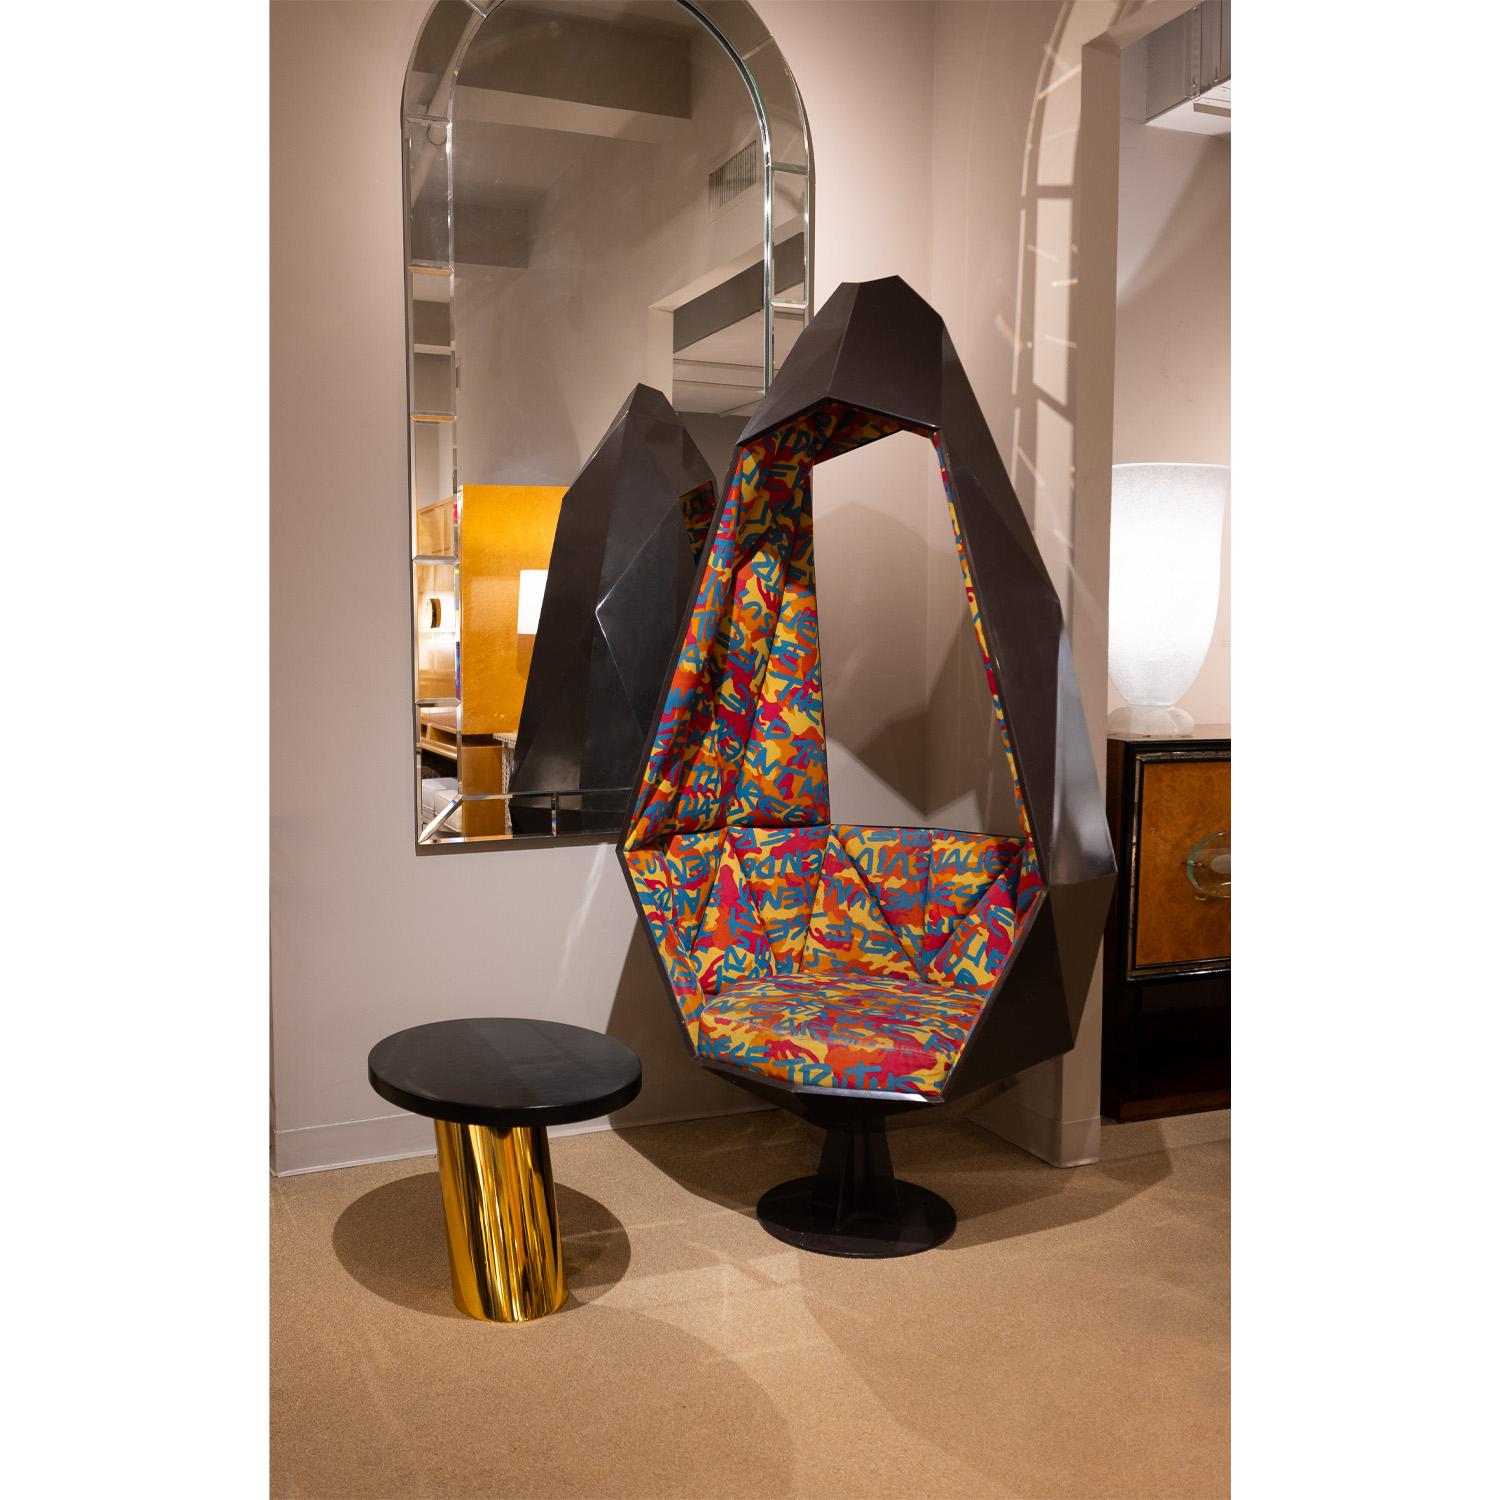 Stephen Sprouse Rare and Impressive Pod Chair with Iconic Graffiti Fabric 2003 1